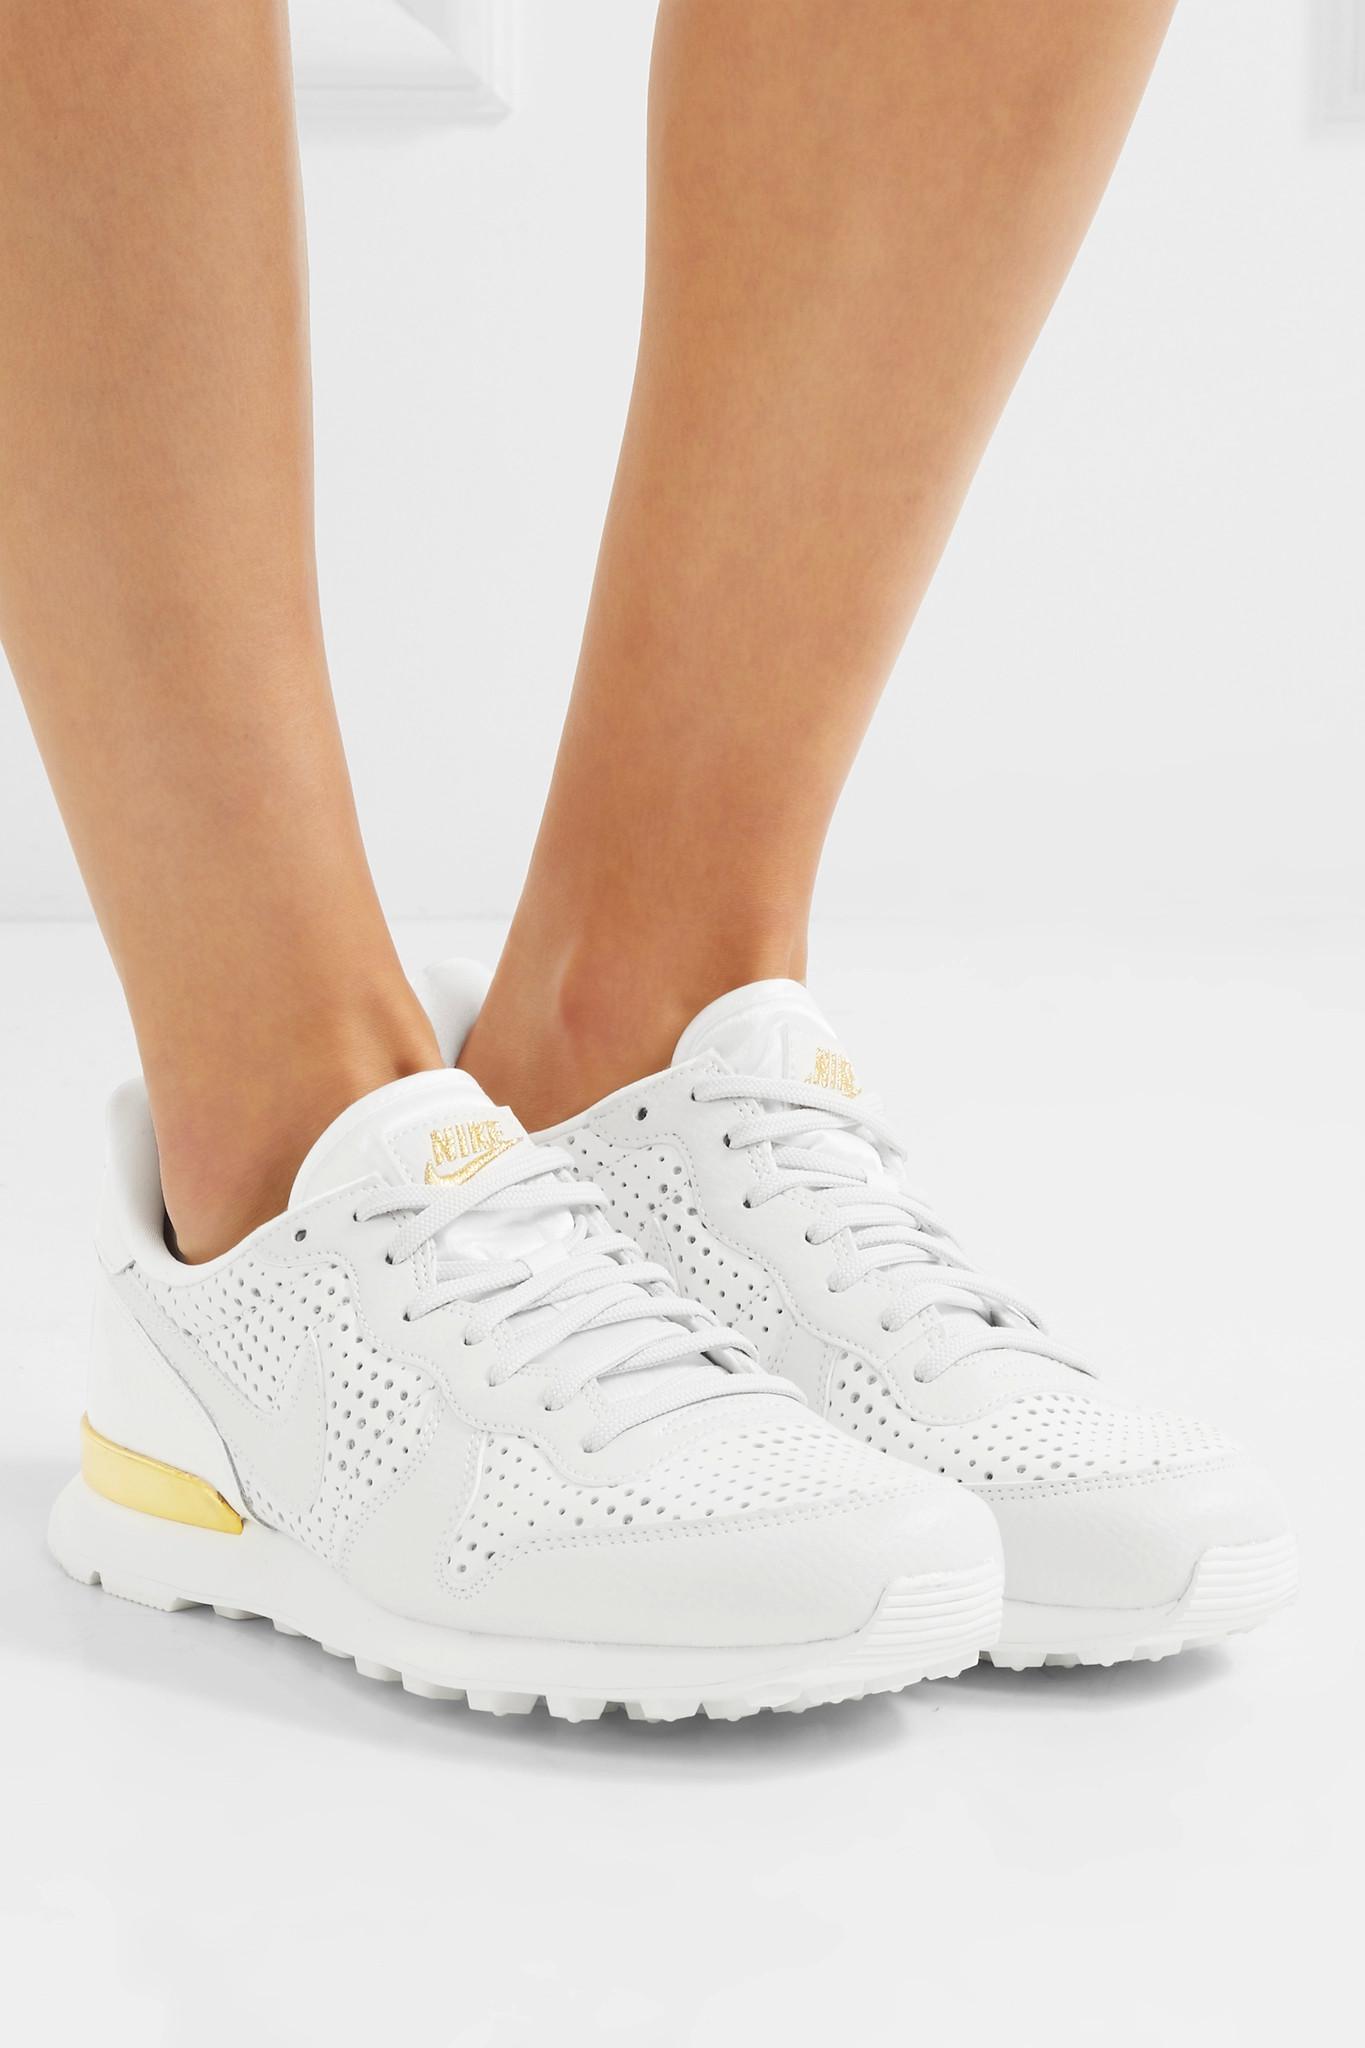 Nike Internationalist Perforated Leather Sneakers in White | Lyst